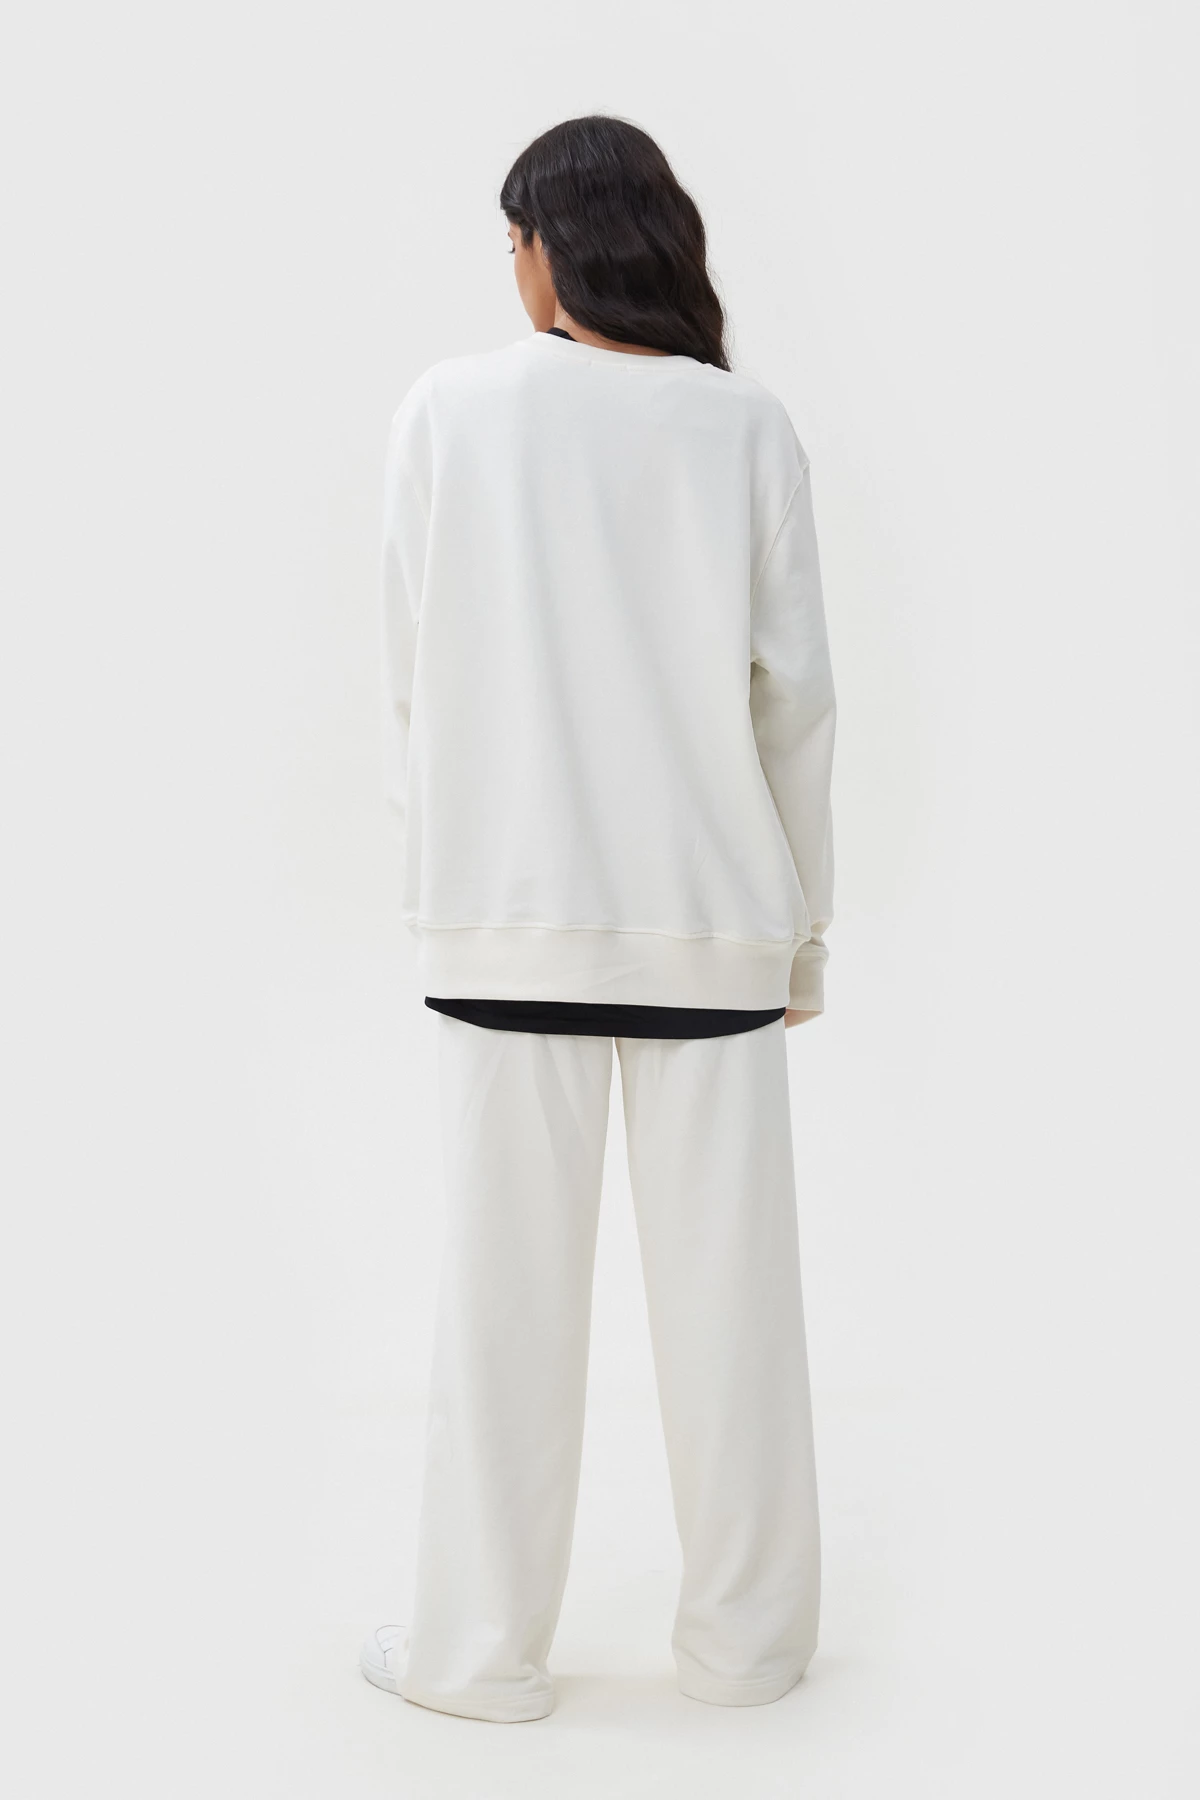 Milky loose fit jersey pants, photo 4